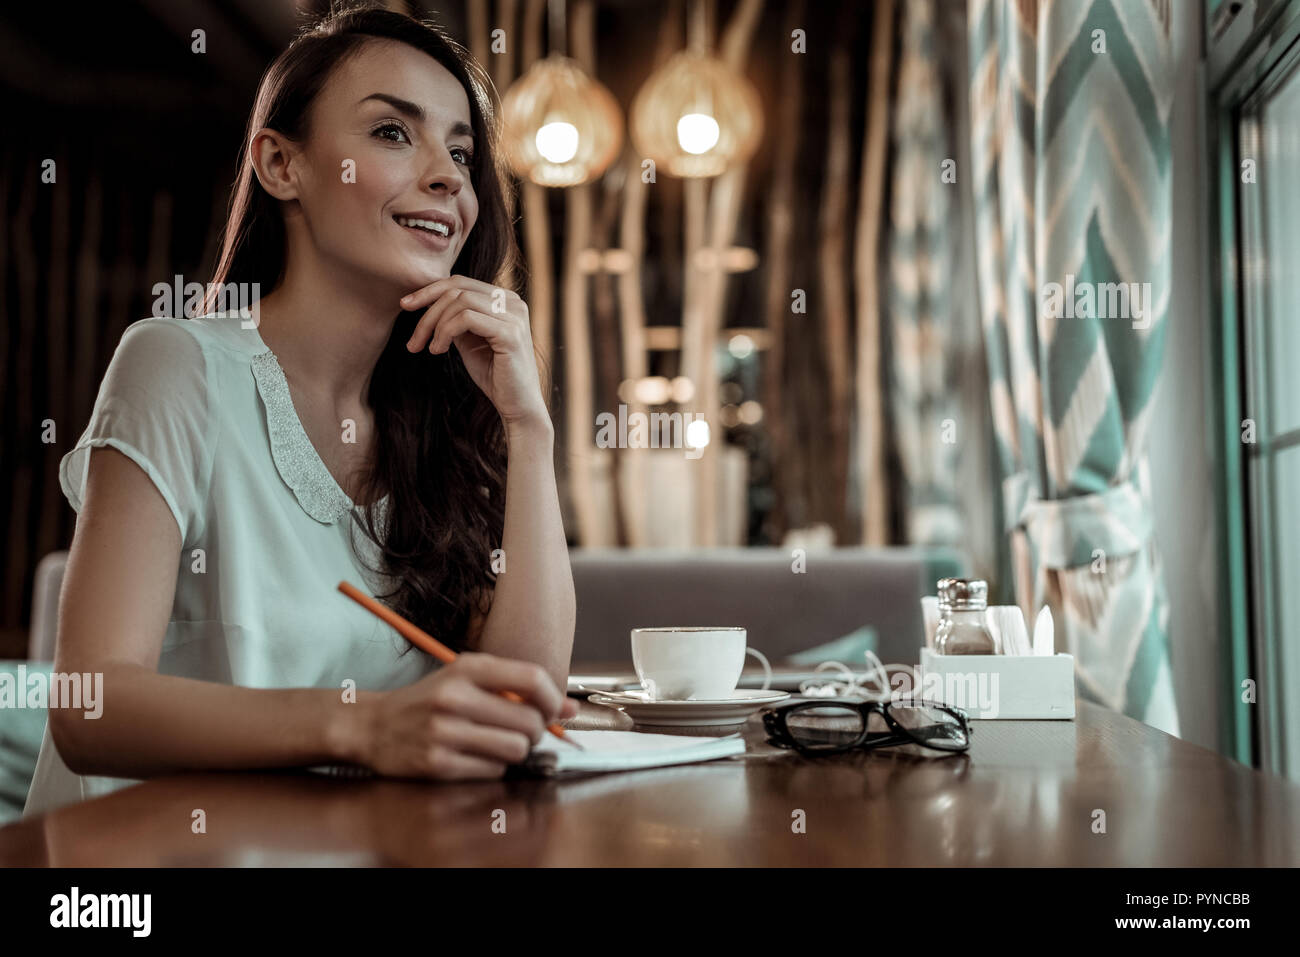 Dreamy female person thinking about her business Stock Photo